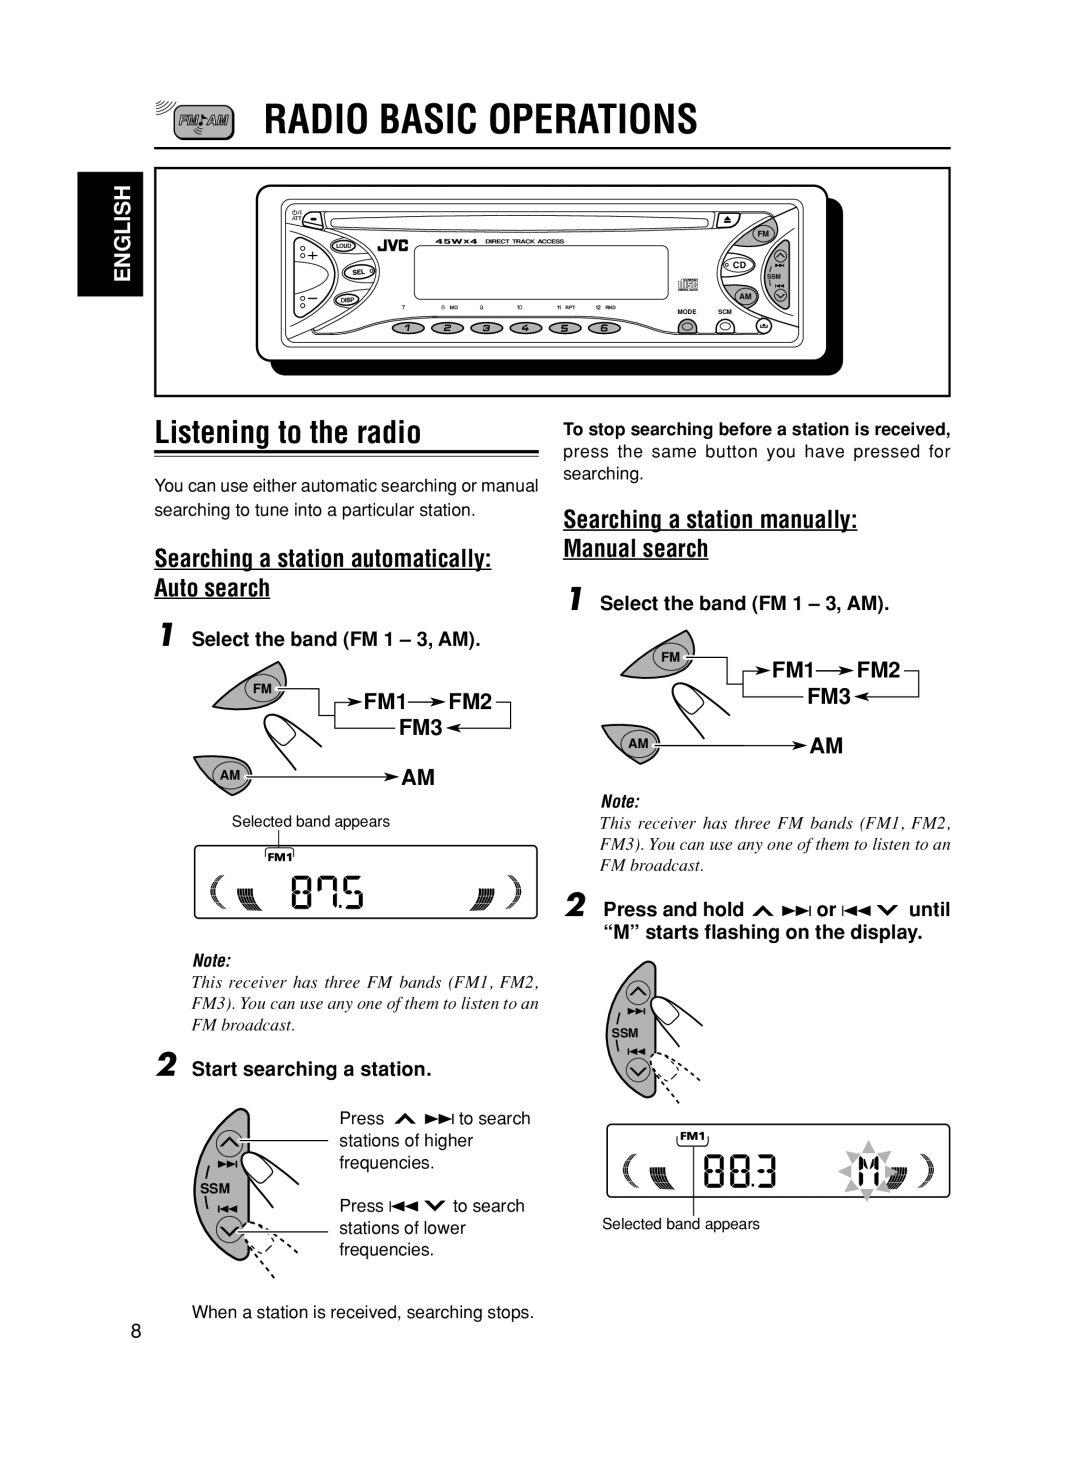 JVC KD-S585 Radio Basic Operations, Listening to the radio, Searching a station automatically Auto search, FM1FM2 FM3 